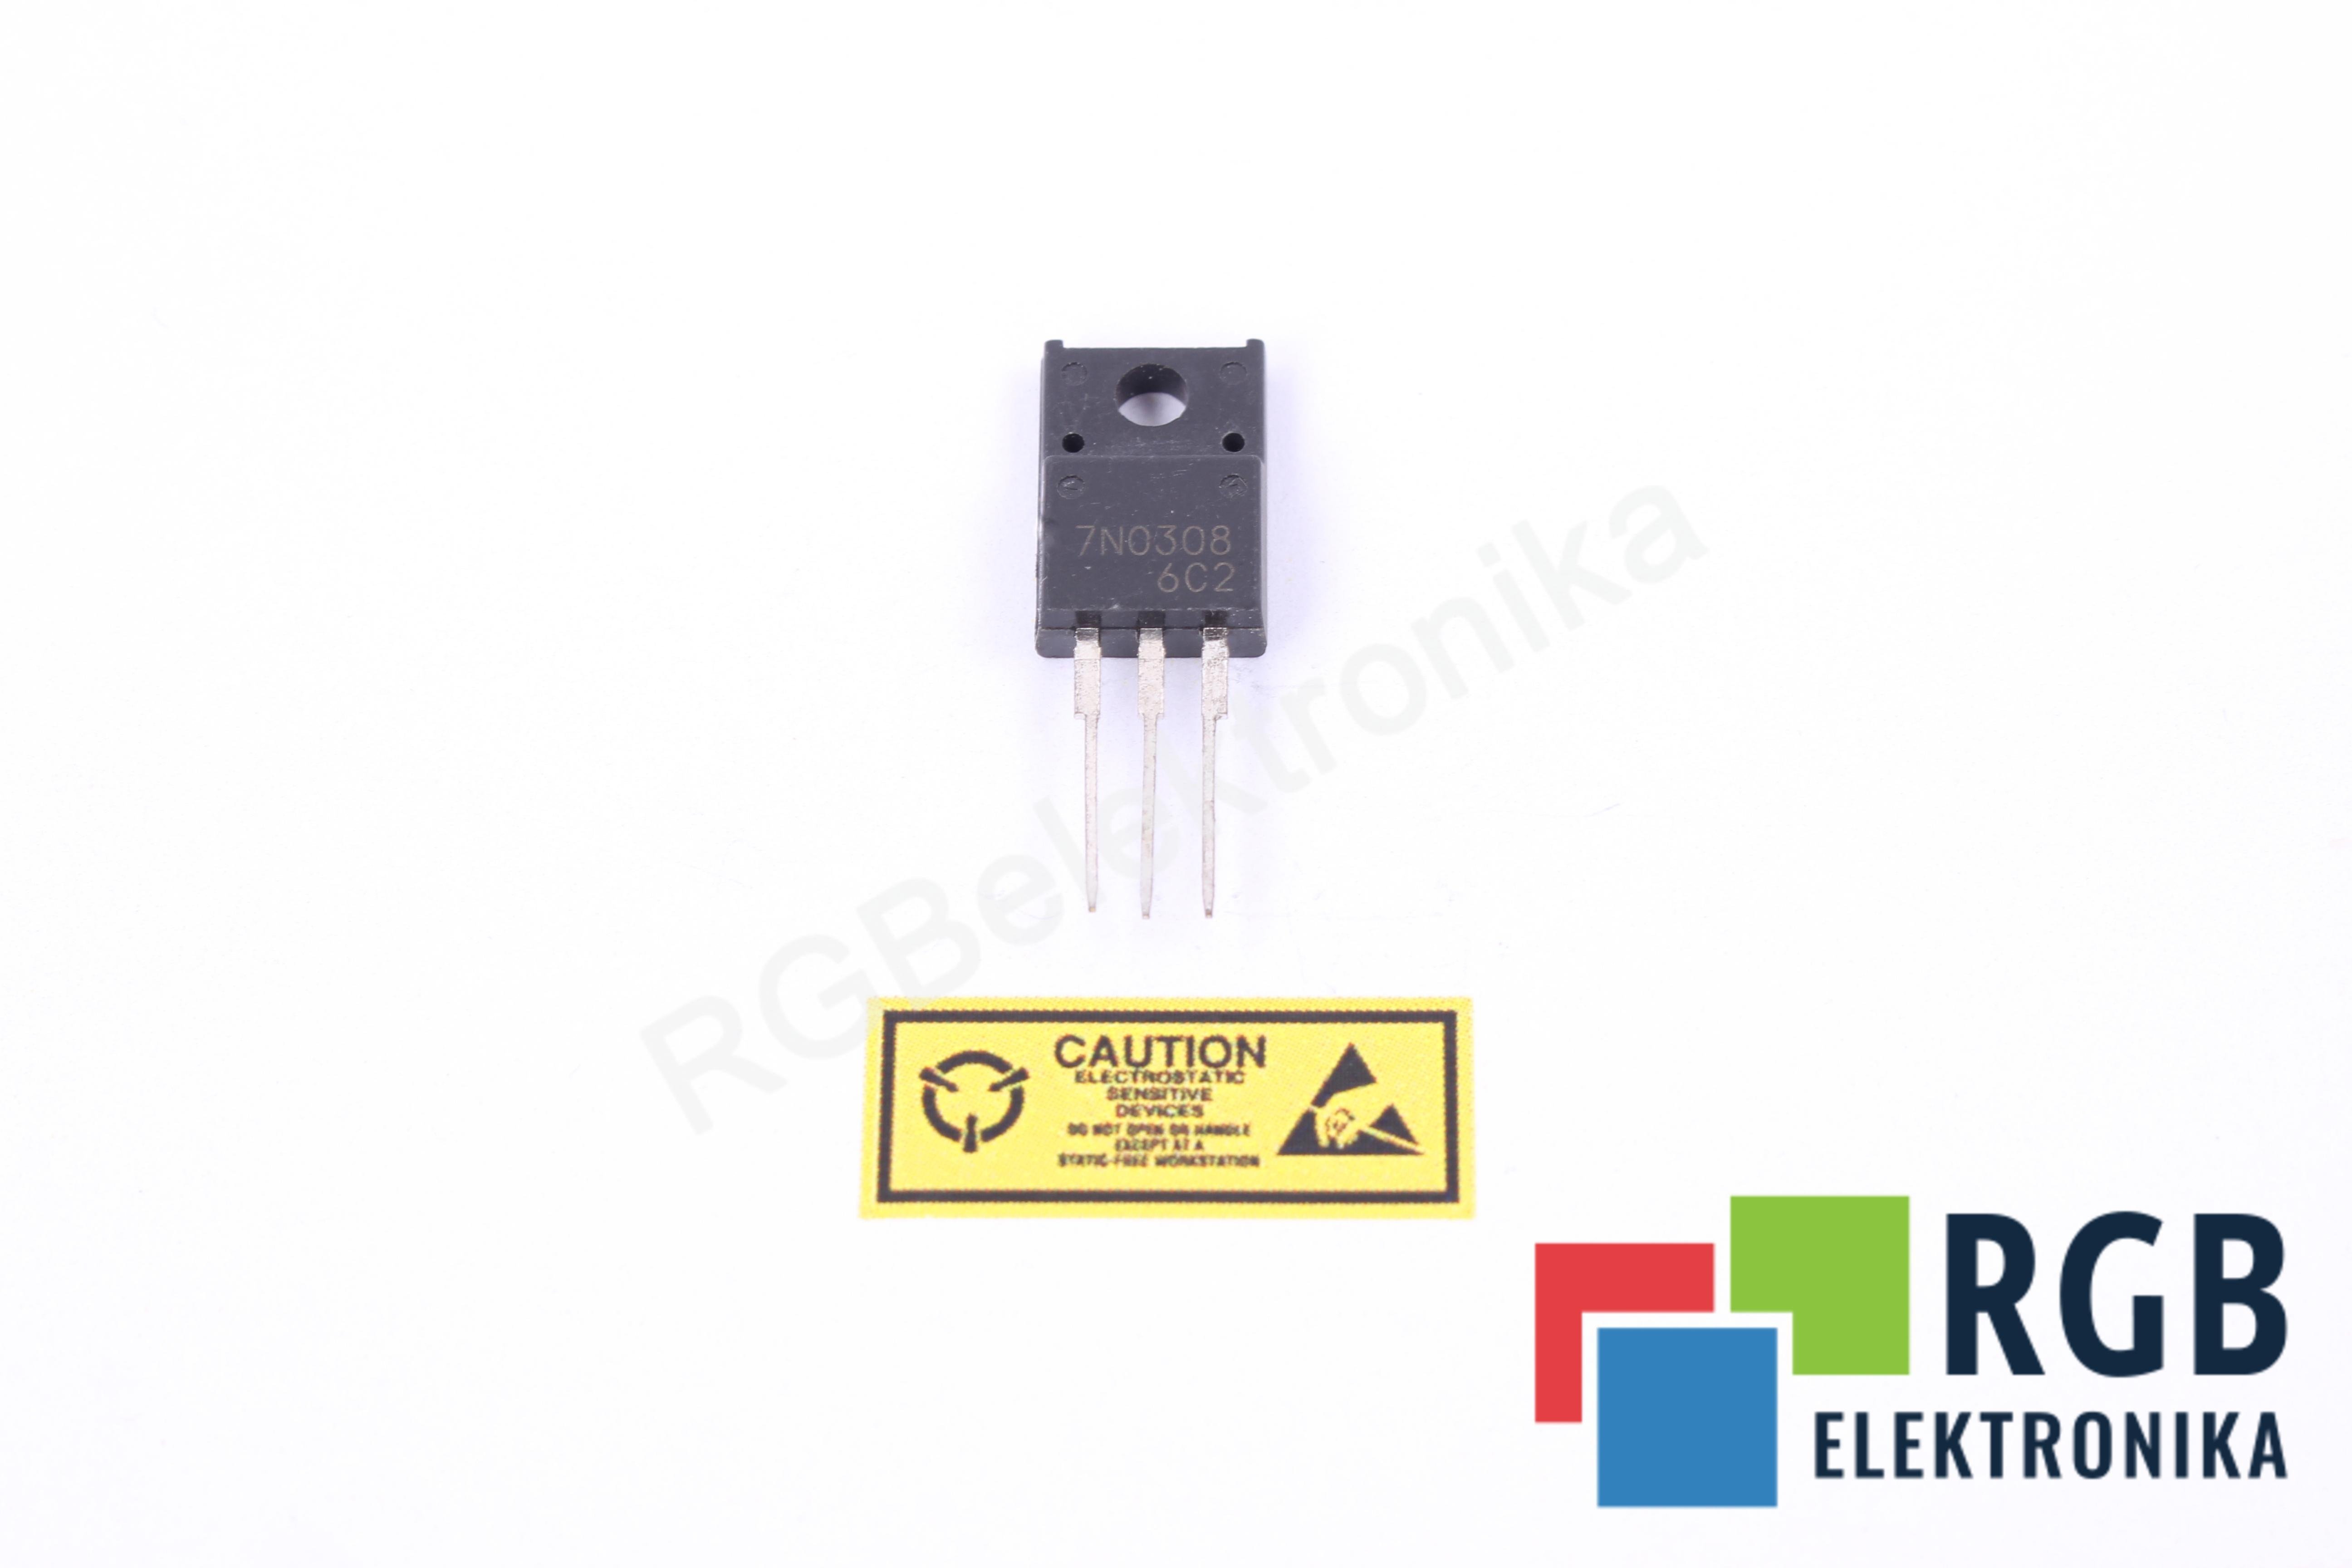 NOWY TRANZYSTOR MOCY MOSFET 7N0308 30V 60A TO-254 THT RENESAS